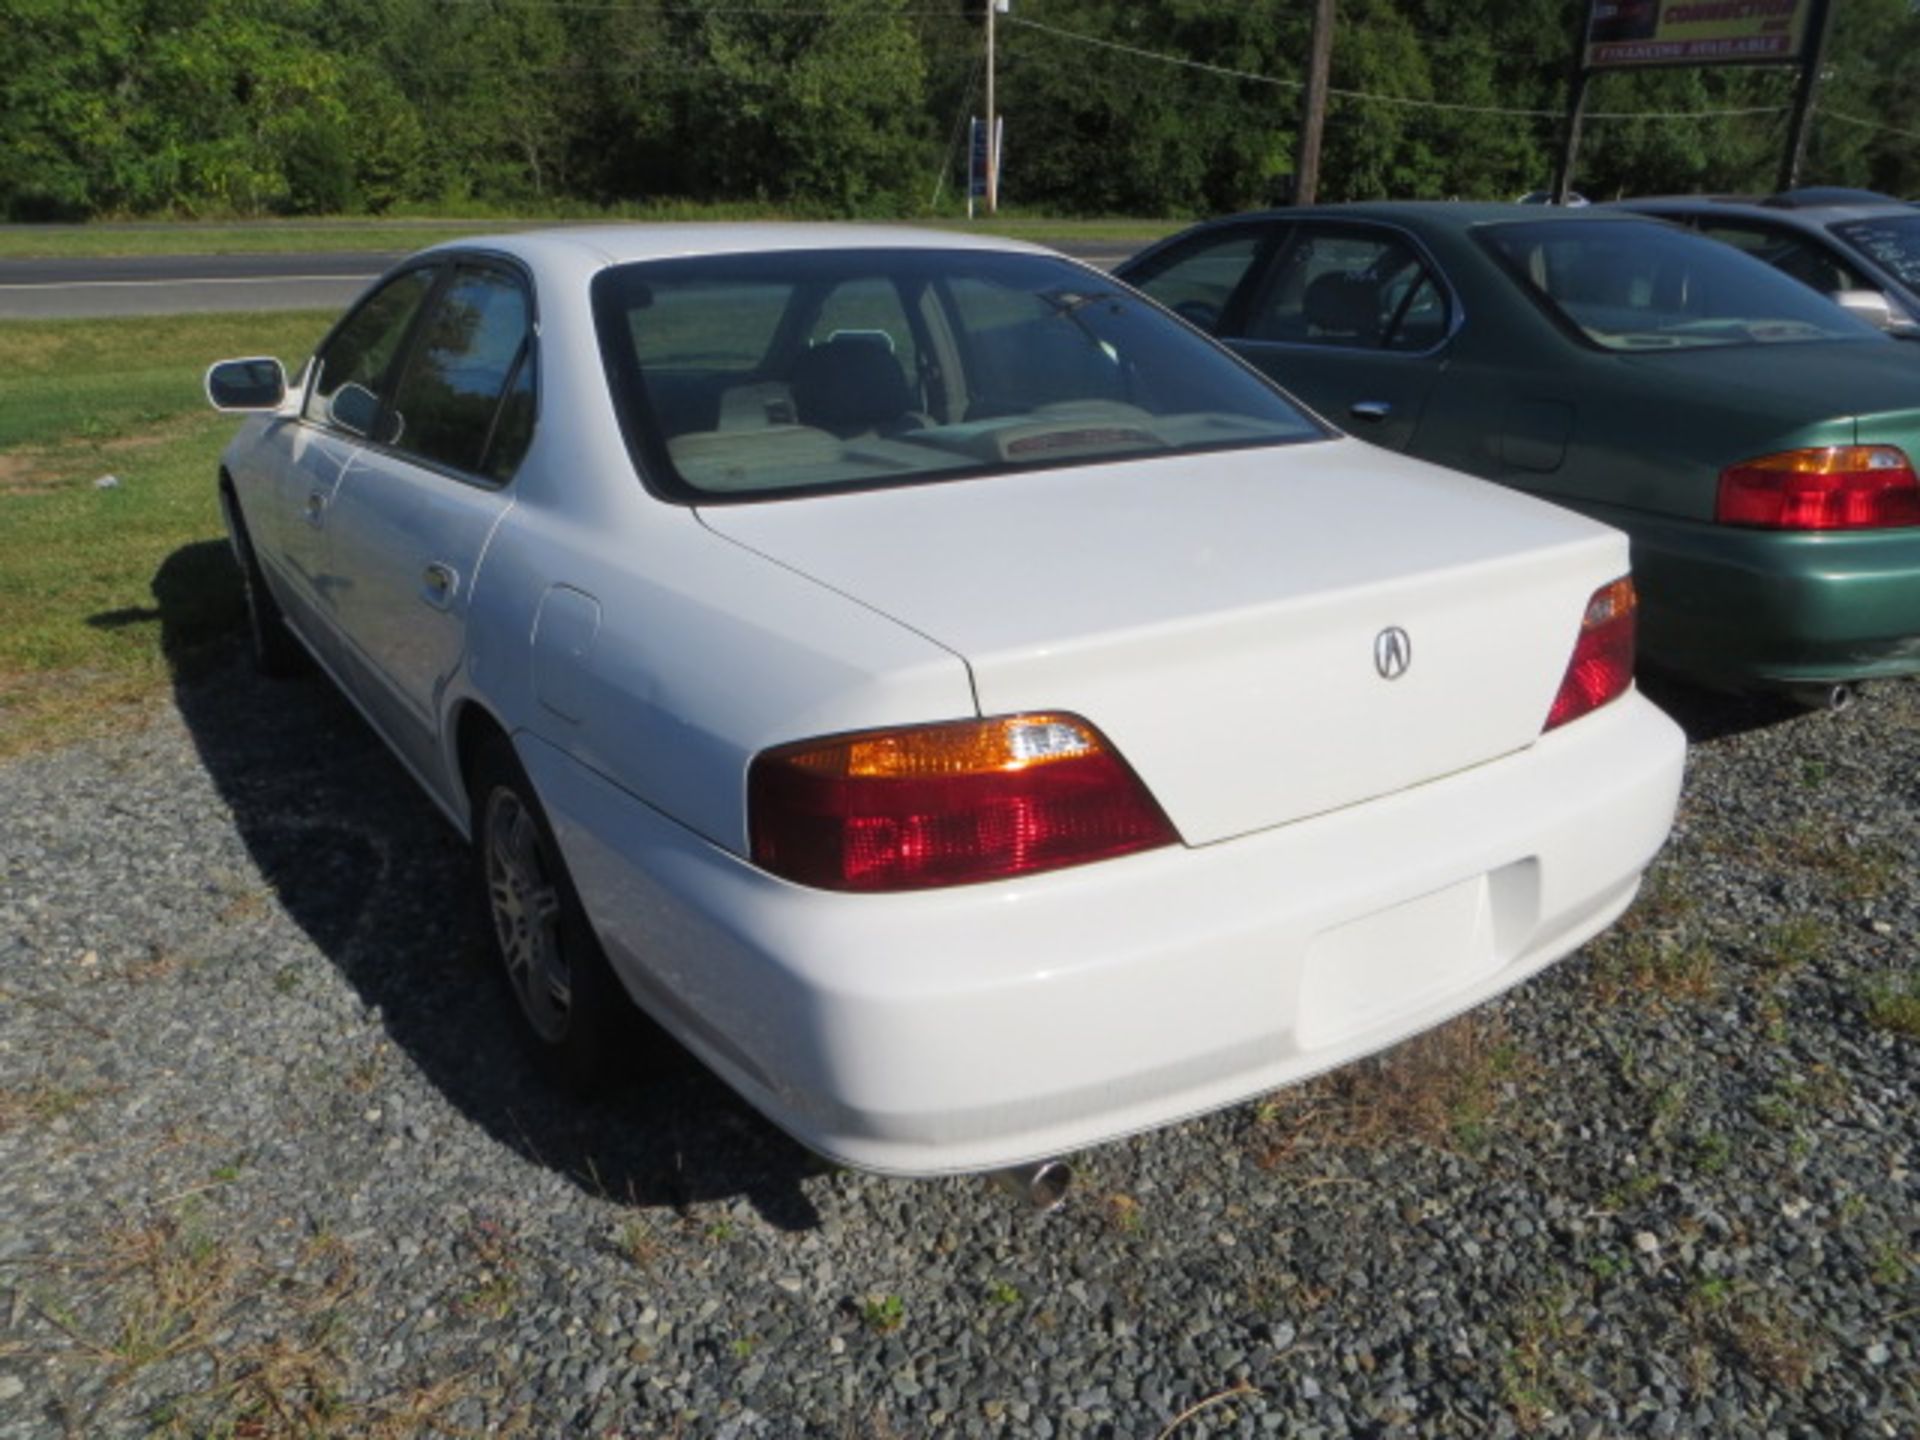 1999 Acura TL- 194000 MILES,VIN 19UUA5640XA010961, VEHICLE BEING SOLD WITH SALVAGE TITLE AND - Image 3 of 3